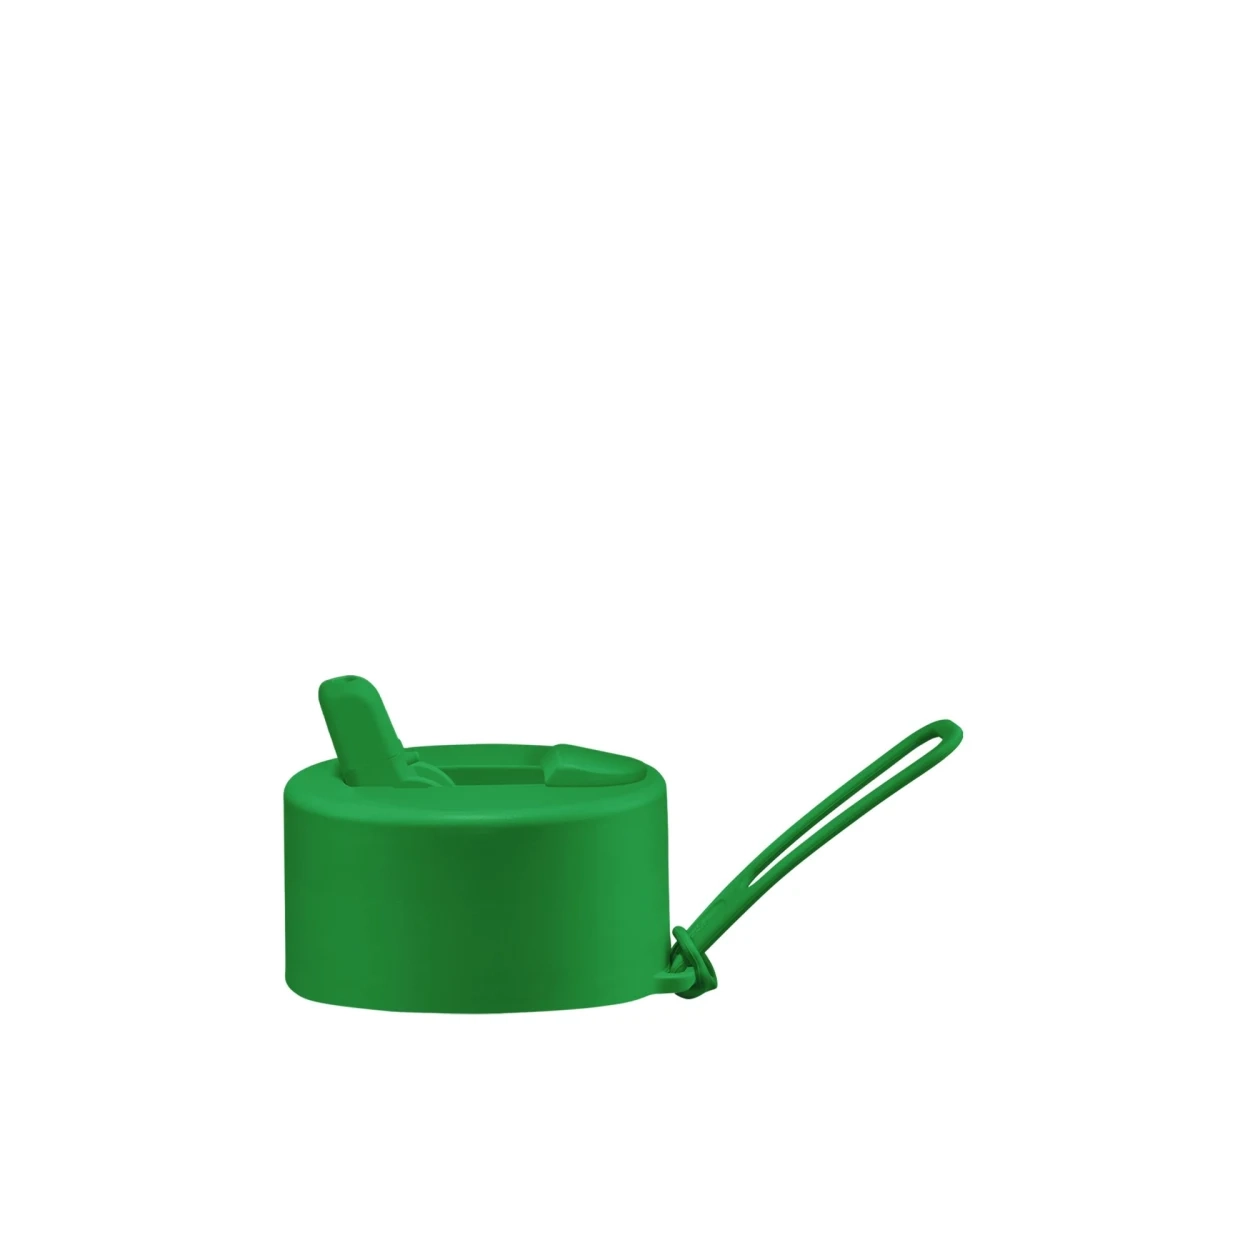 Frank Green Limited Edition Flip Straw Lid Evergreen Image 1